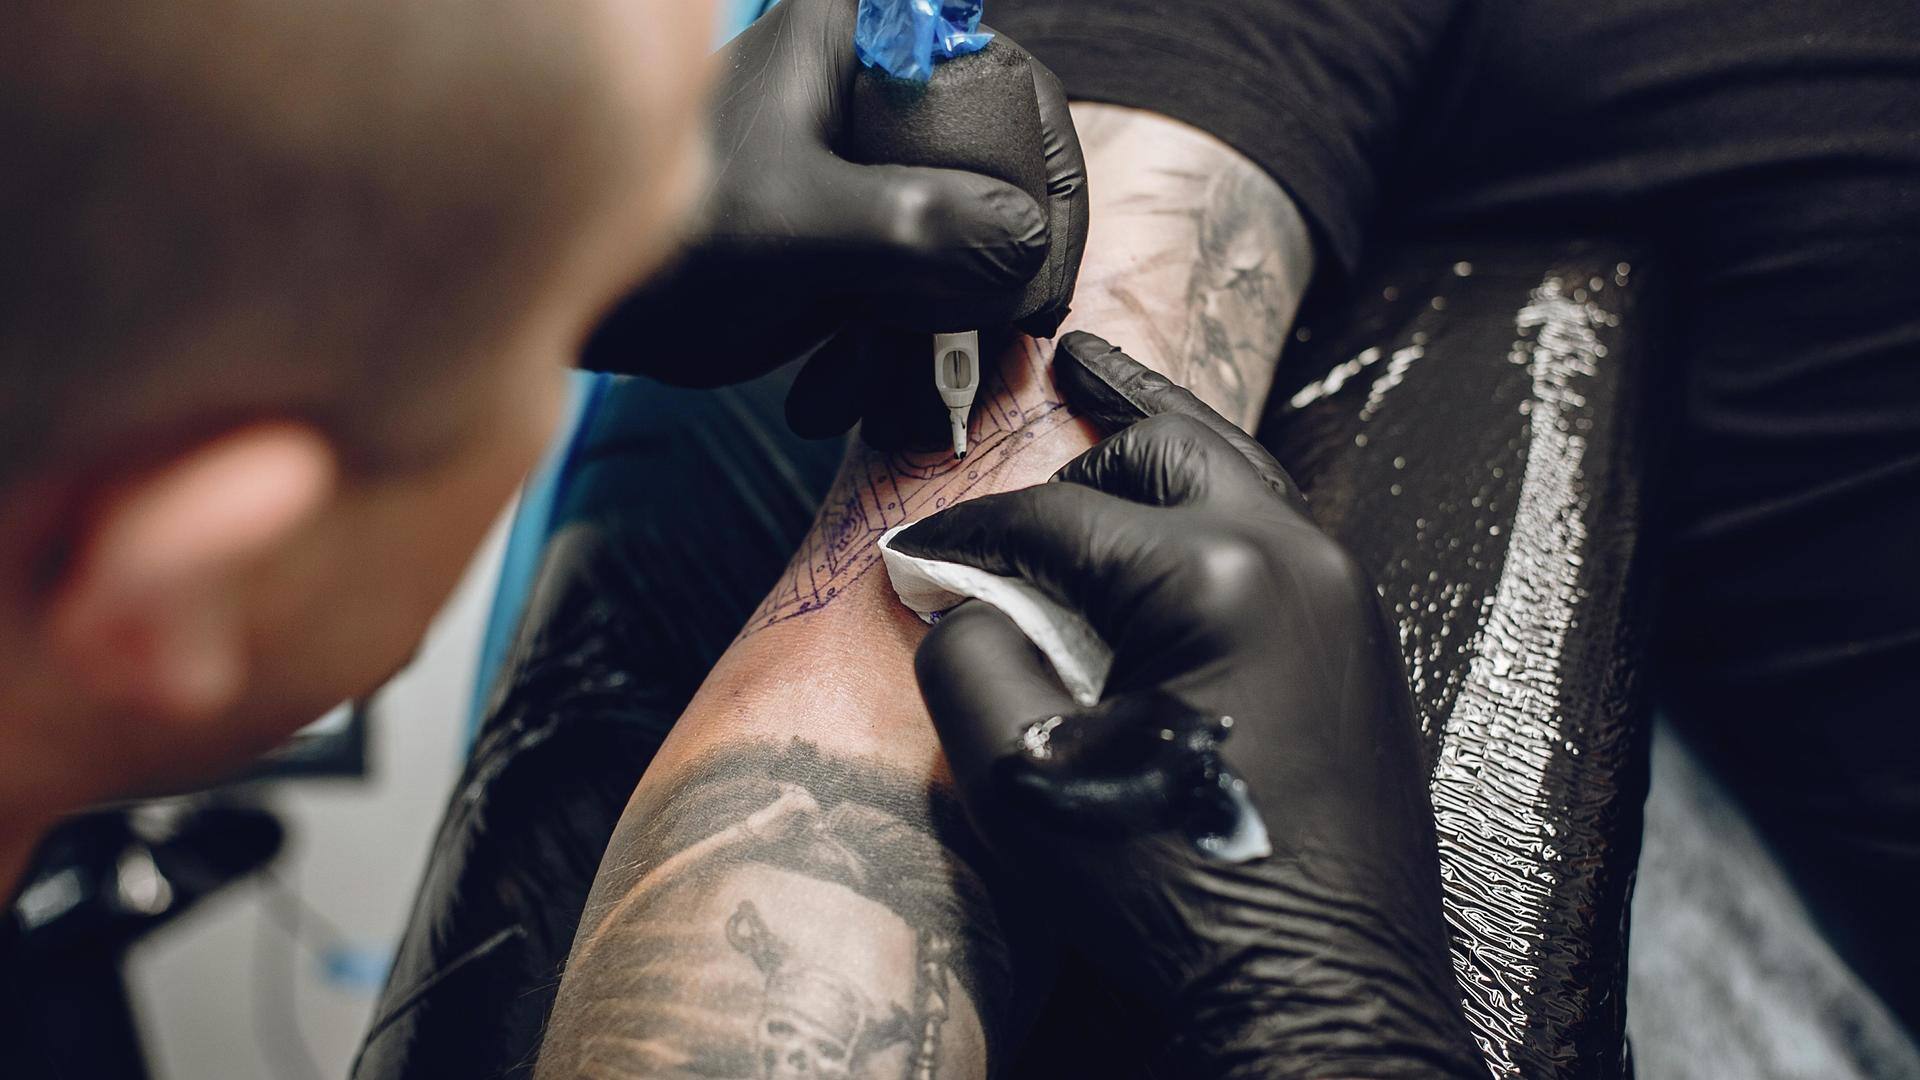 Why getting inked can kickstart a process of healing | Mint Lounge